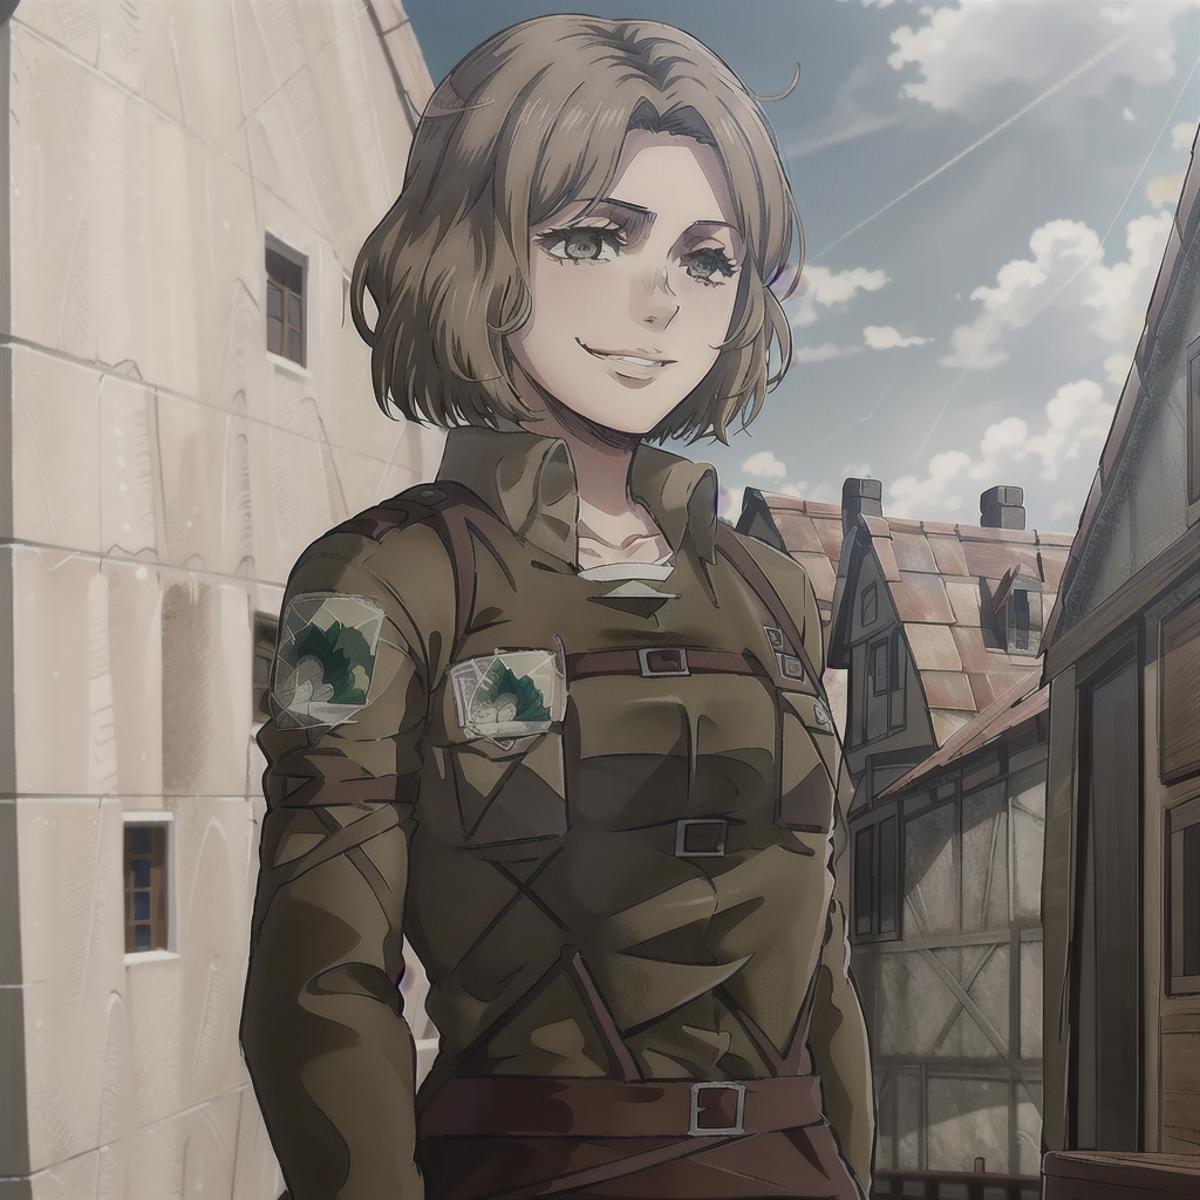 Hitch Dreyse | Attack on Titan image by HC94